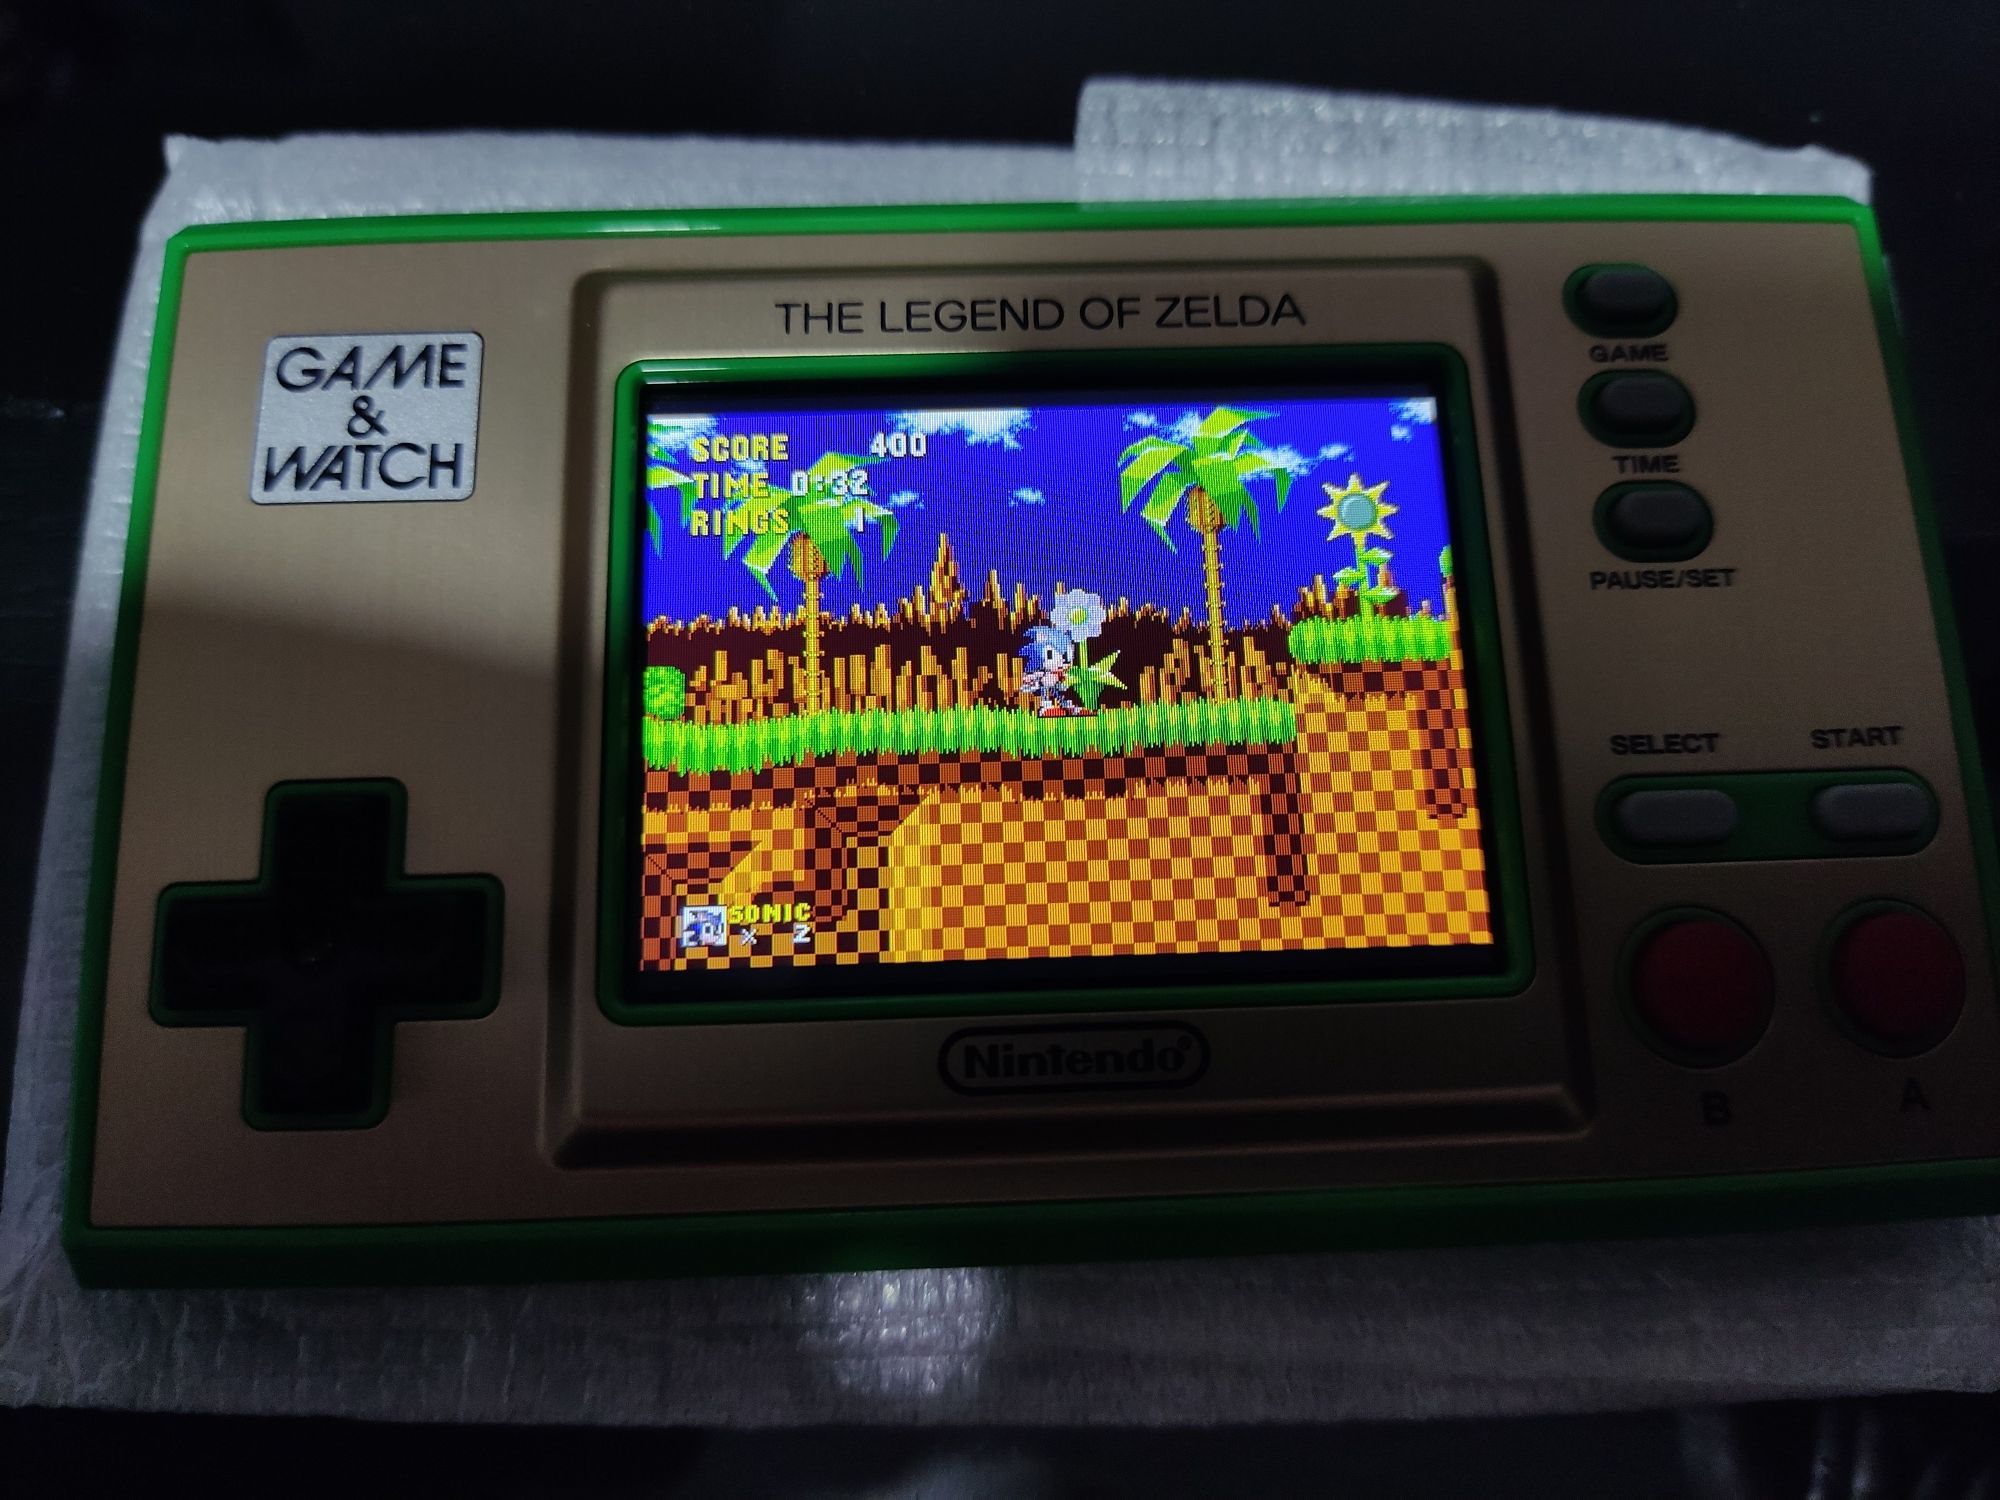 Game and watch Zelda Limited edition